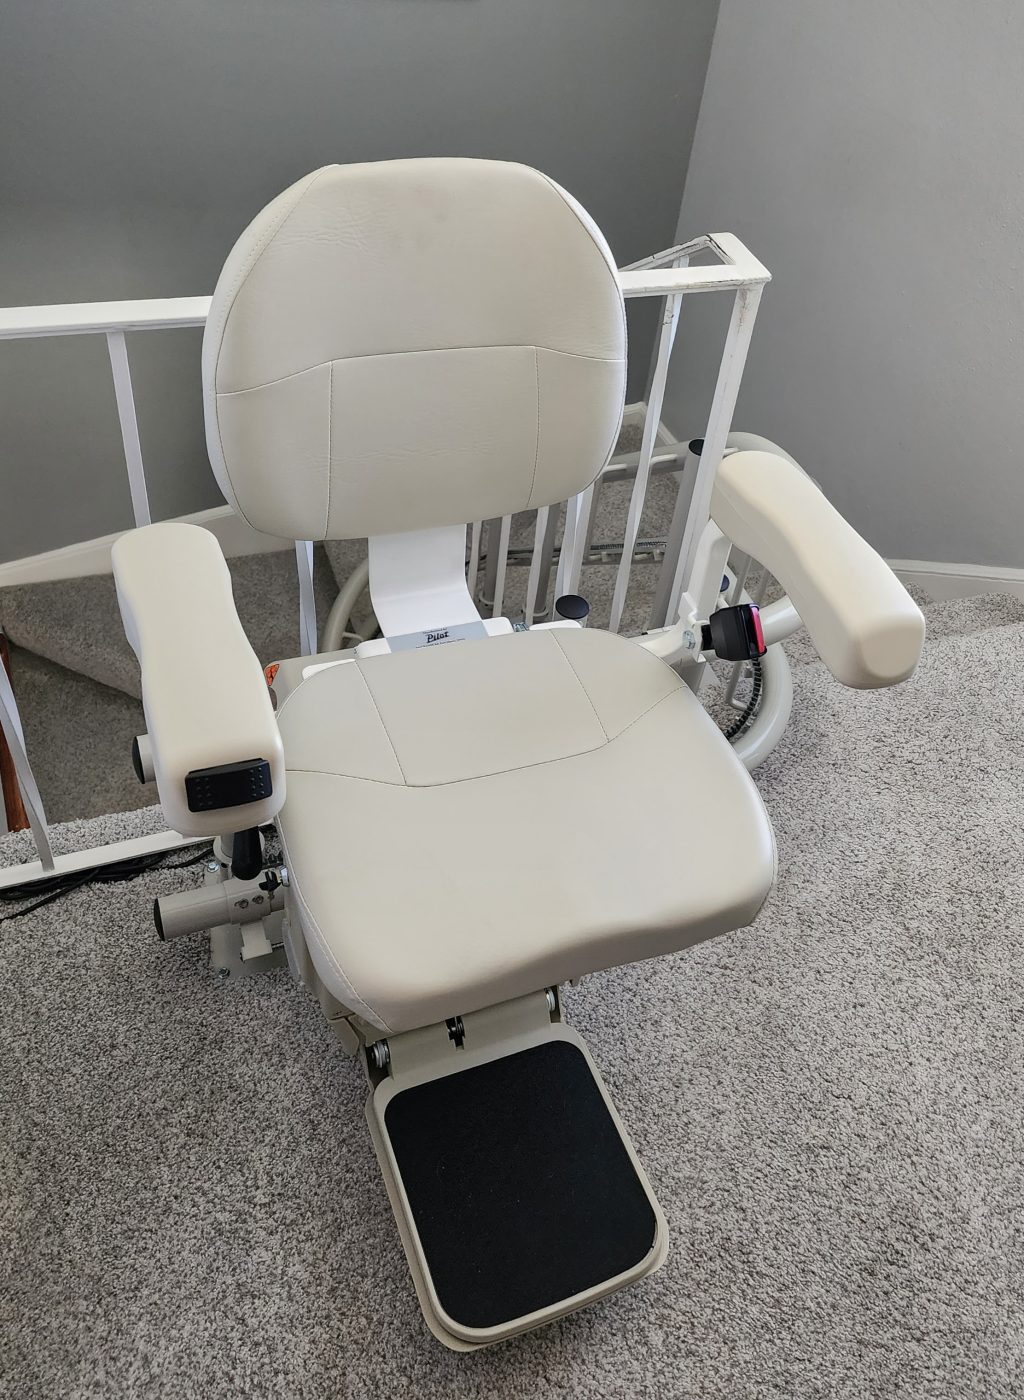 Curved Stairlift -The Pilot Navigator E604